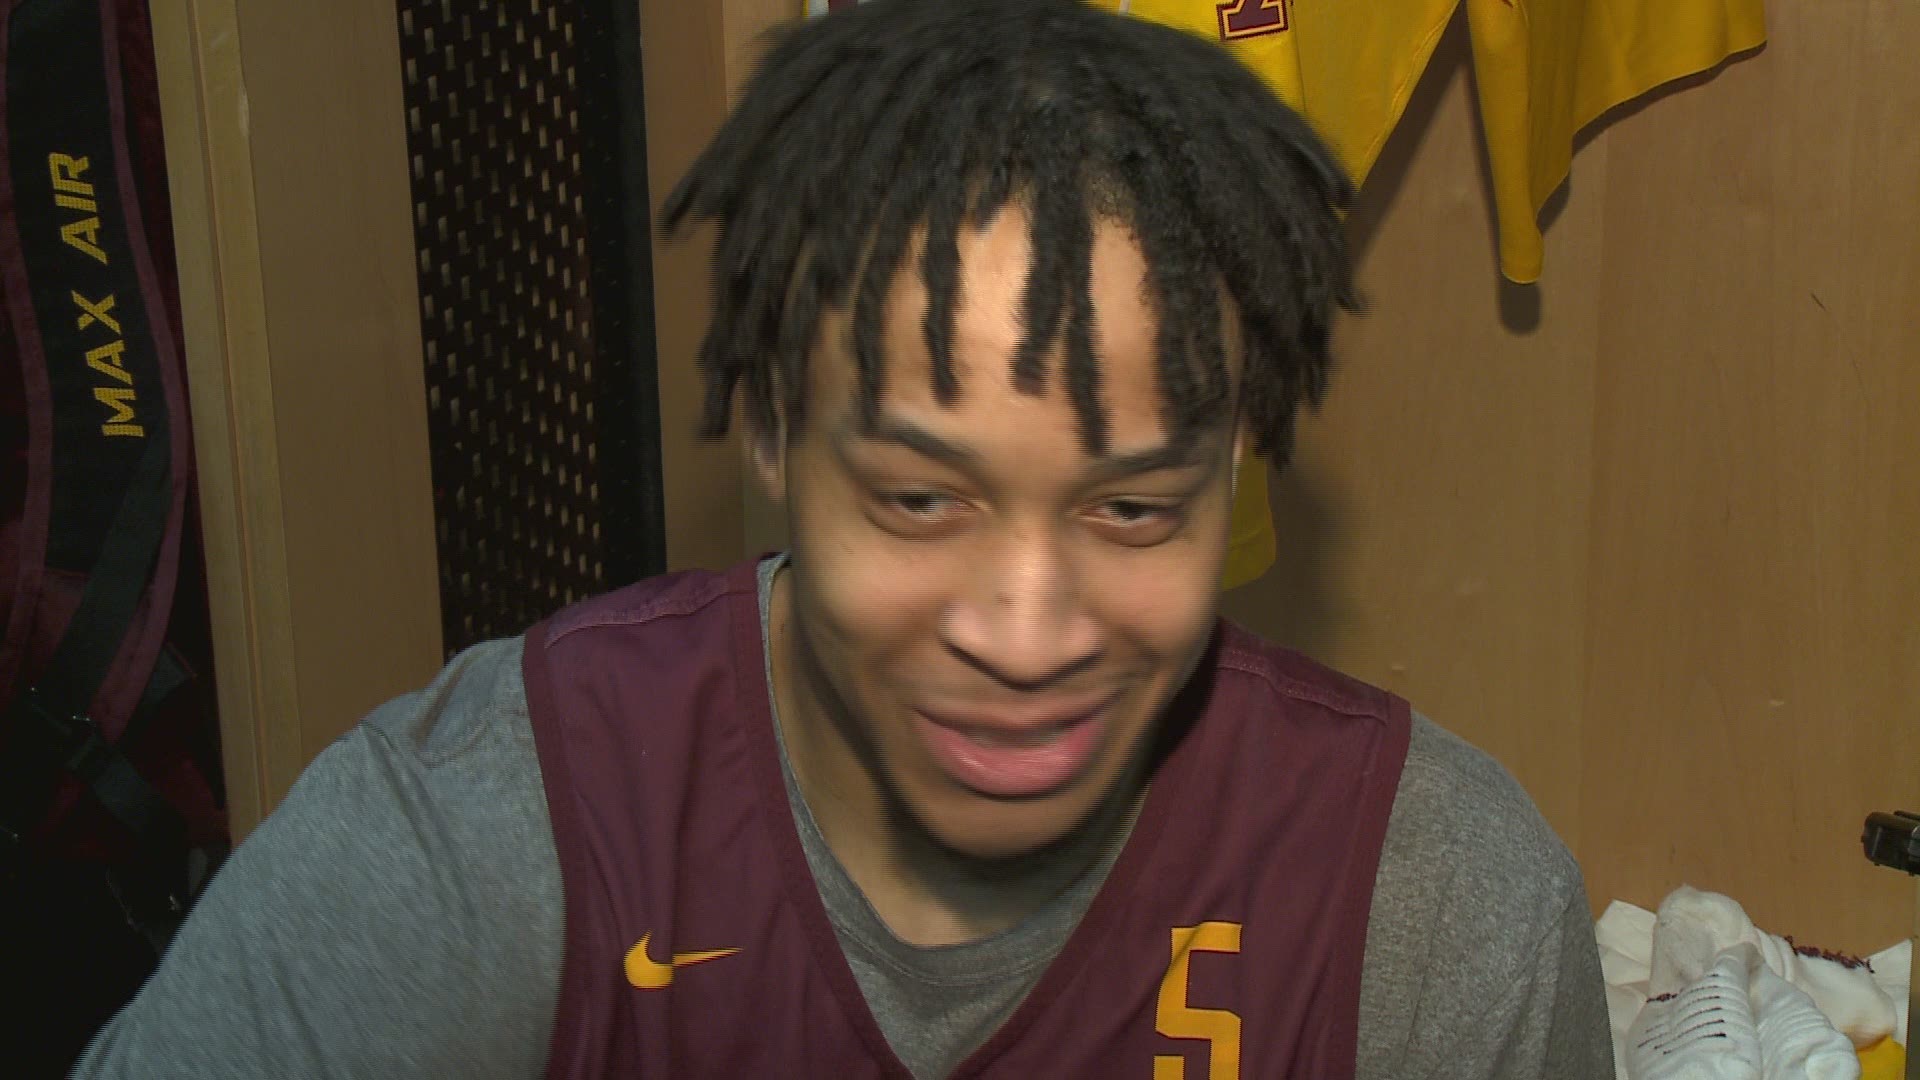 Hear how the Gophers feel about playing Michigan State.